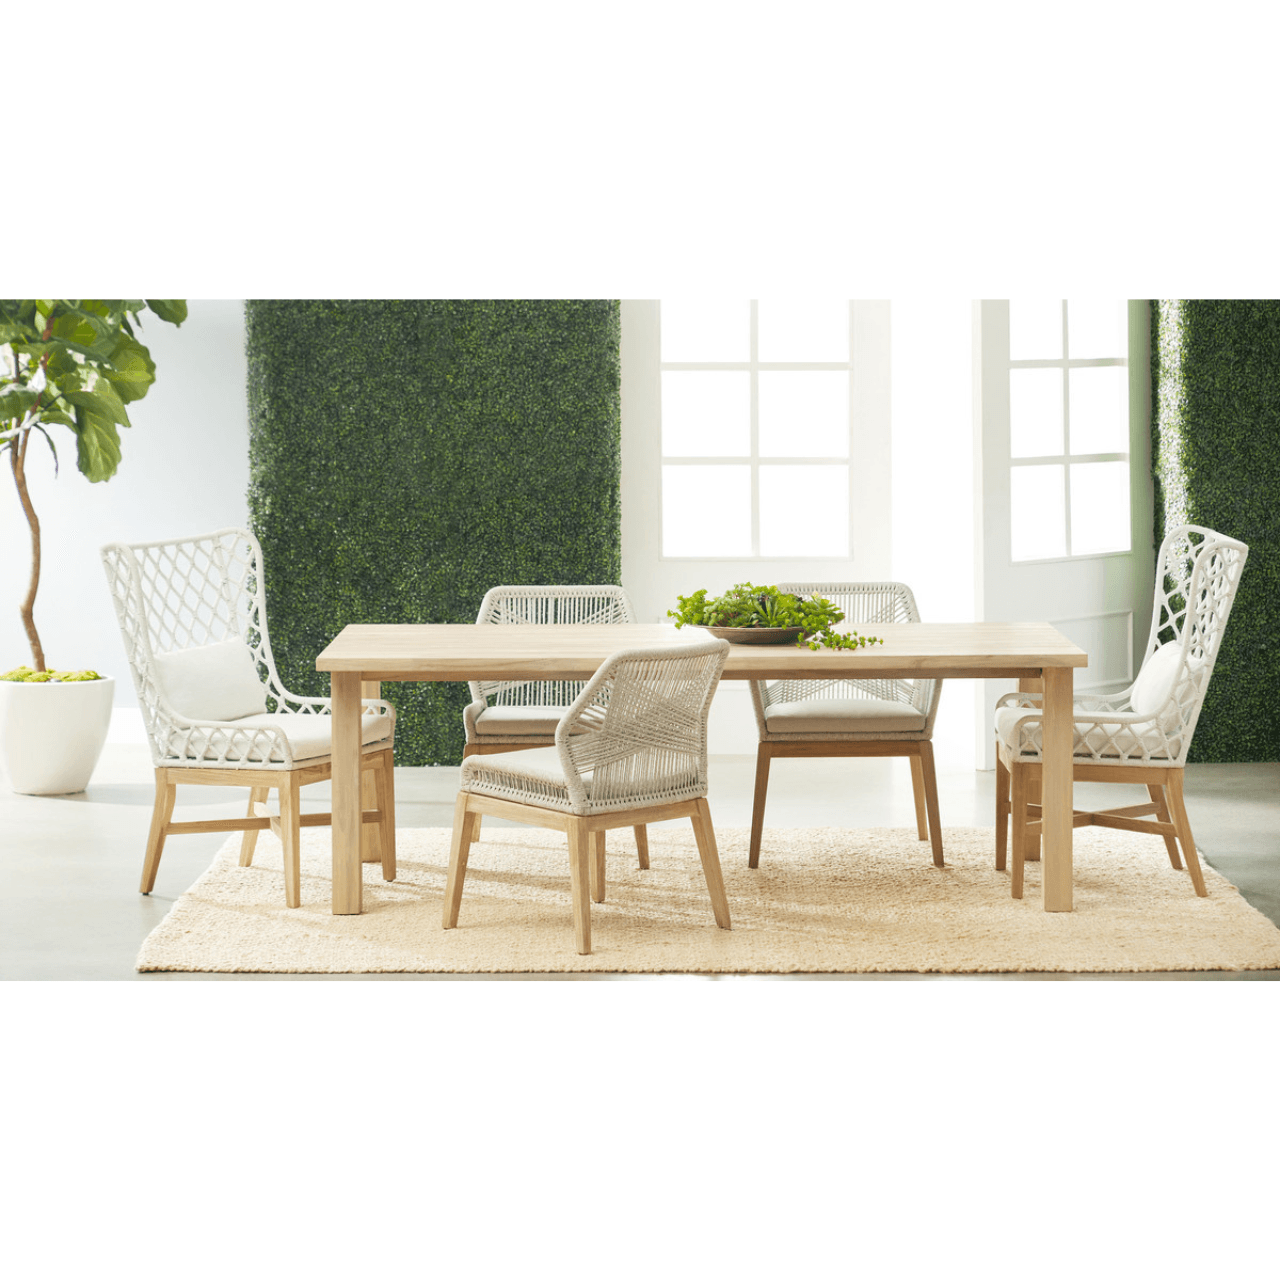 Boxhill's Woven Loom Outdoor Dining Chair | Set of 2 lifestyle Image